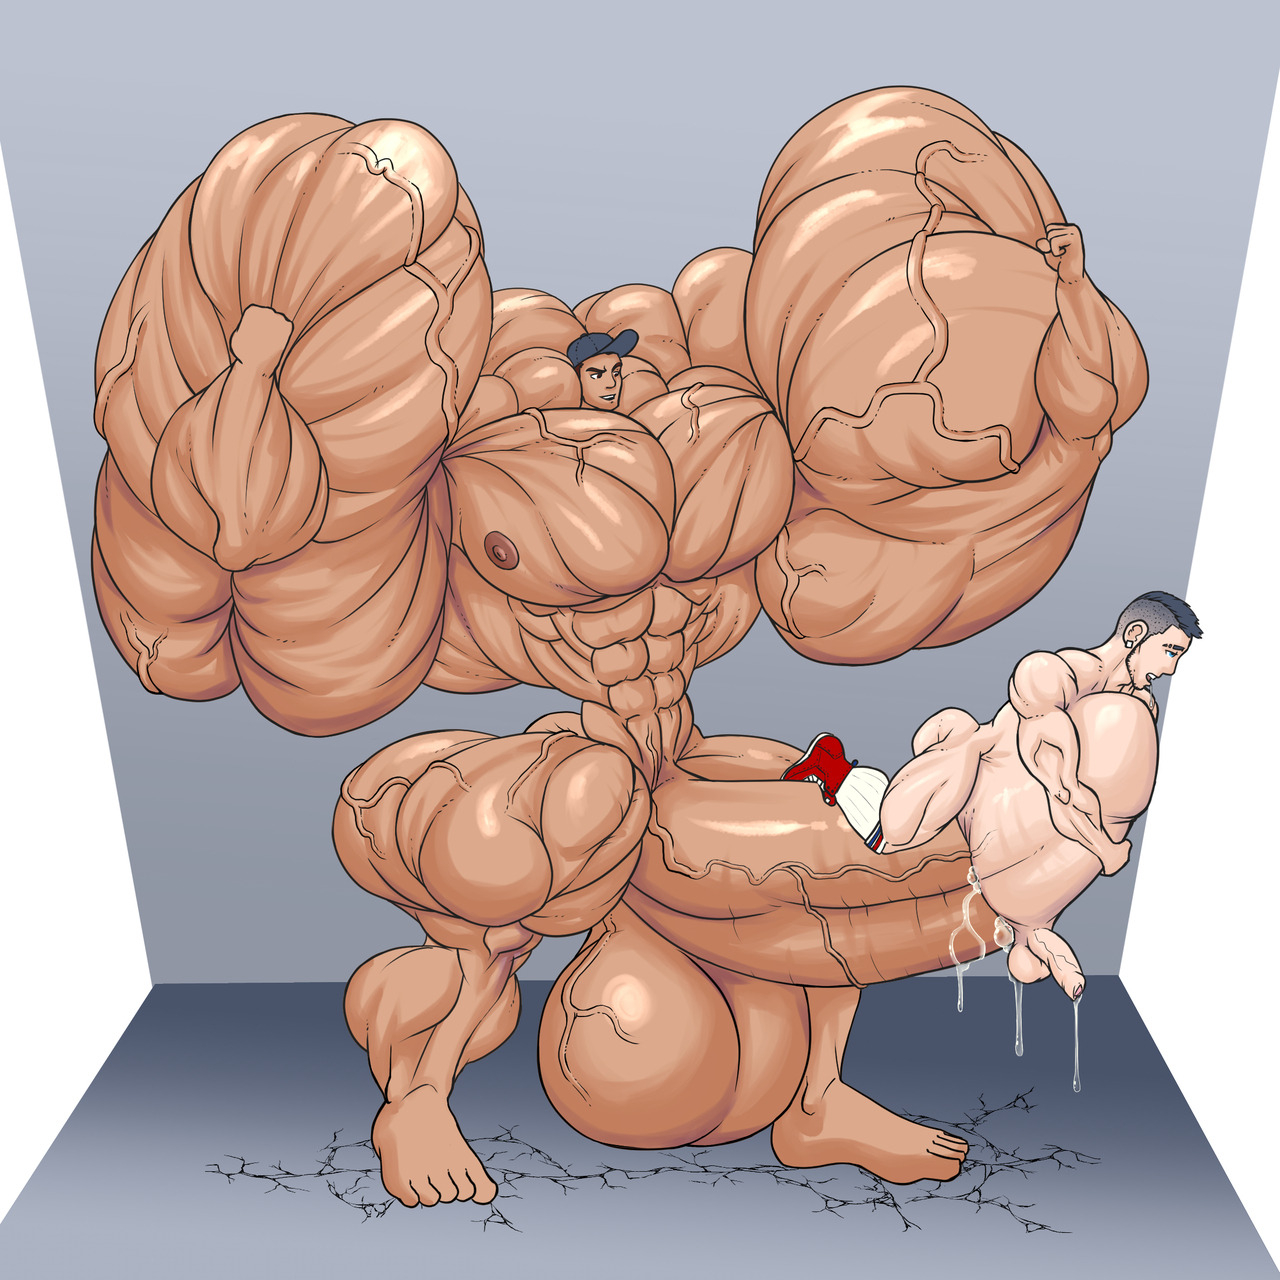 Male muscle growth nude